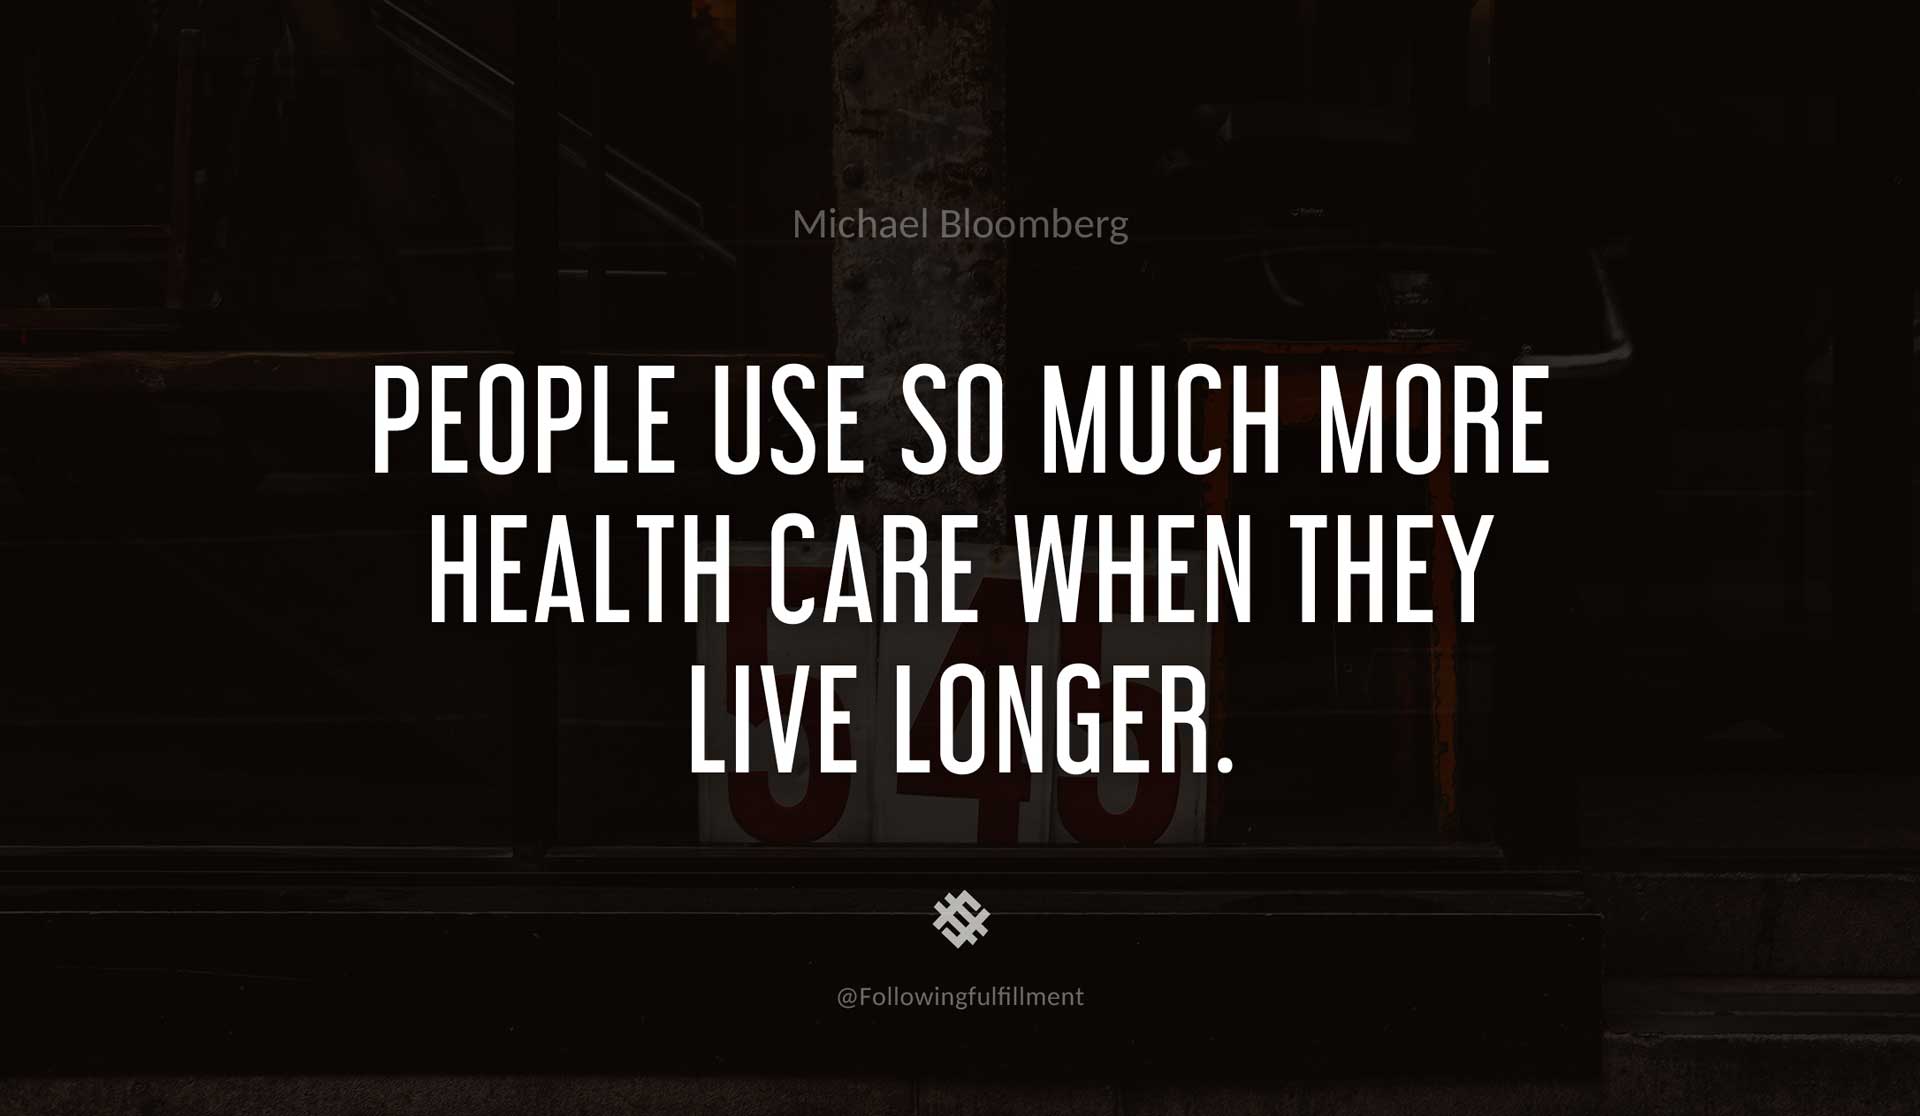 People-use-so-much-more-health-care-when-they-live-longer.-MICHAEL-BLOOMBERG-Quote.jpg